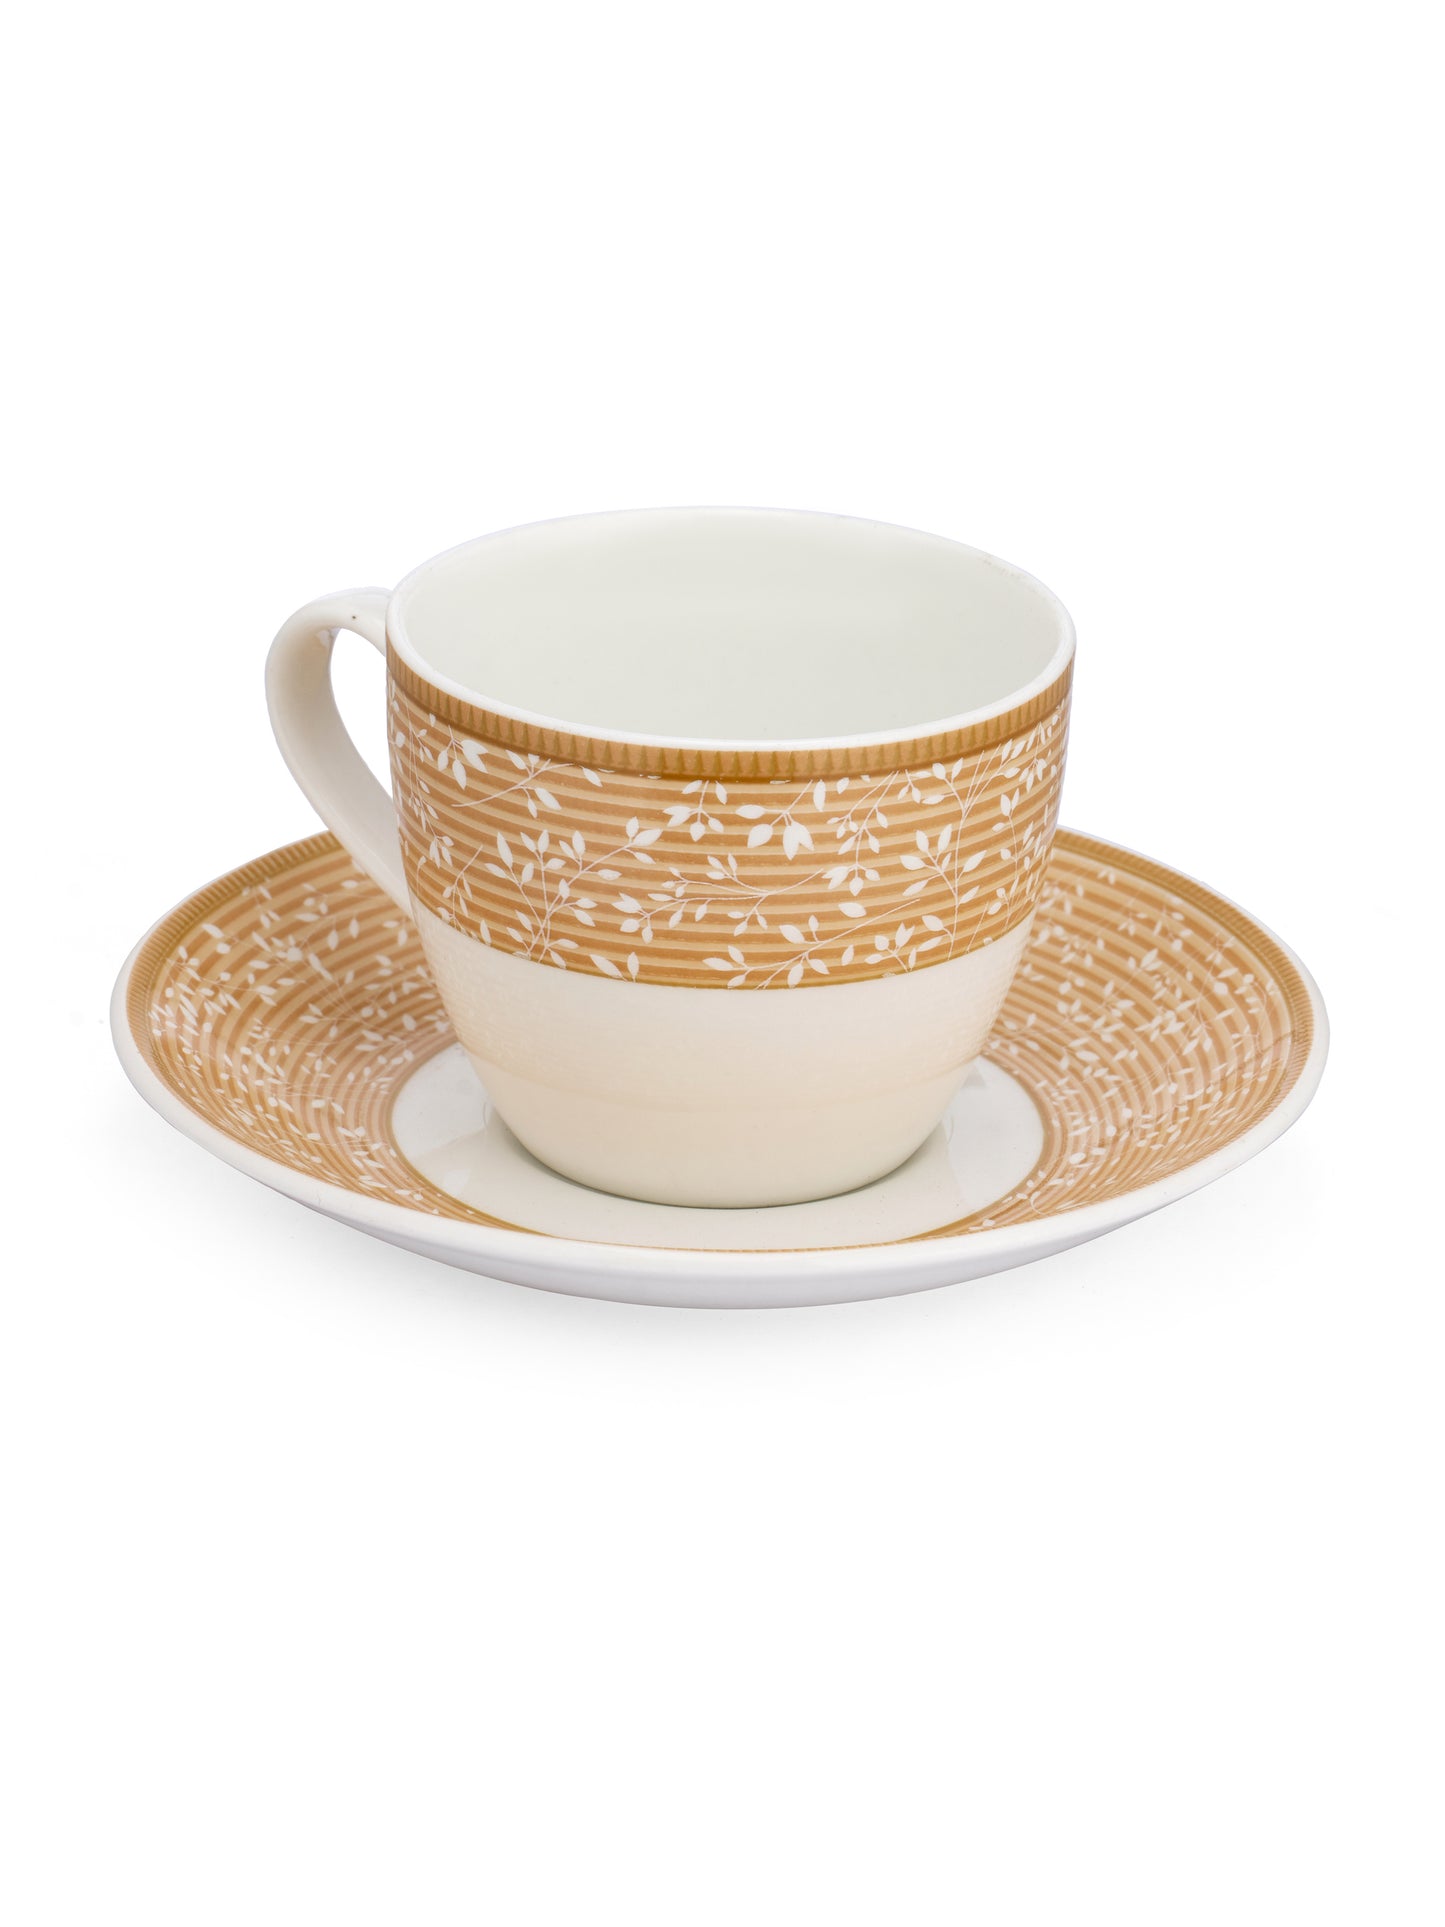 Cream Super Cup & Saucer, 170ml, Set of 12 (6 Cups + 6 Saucers) (S305)